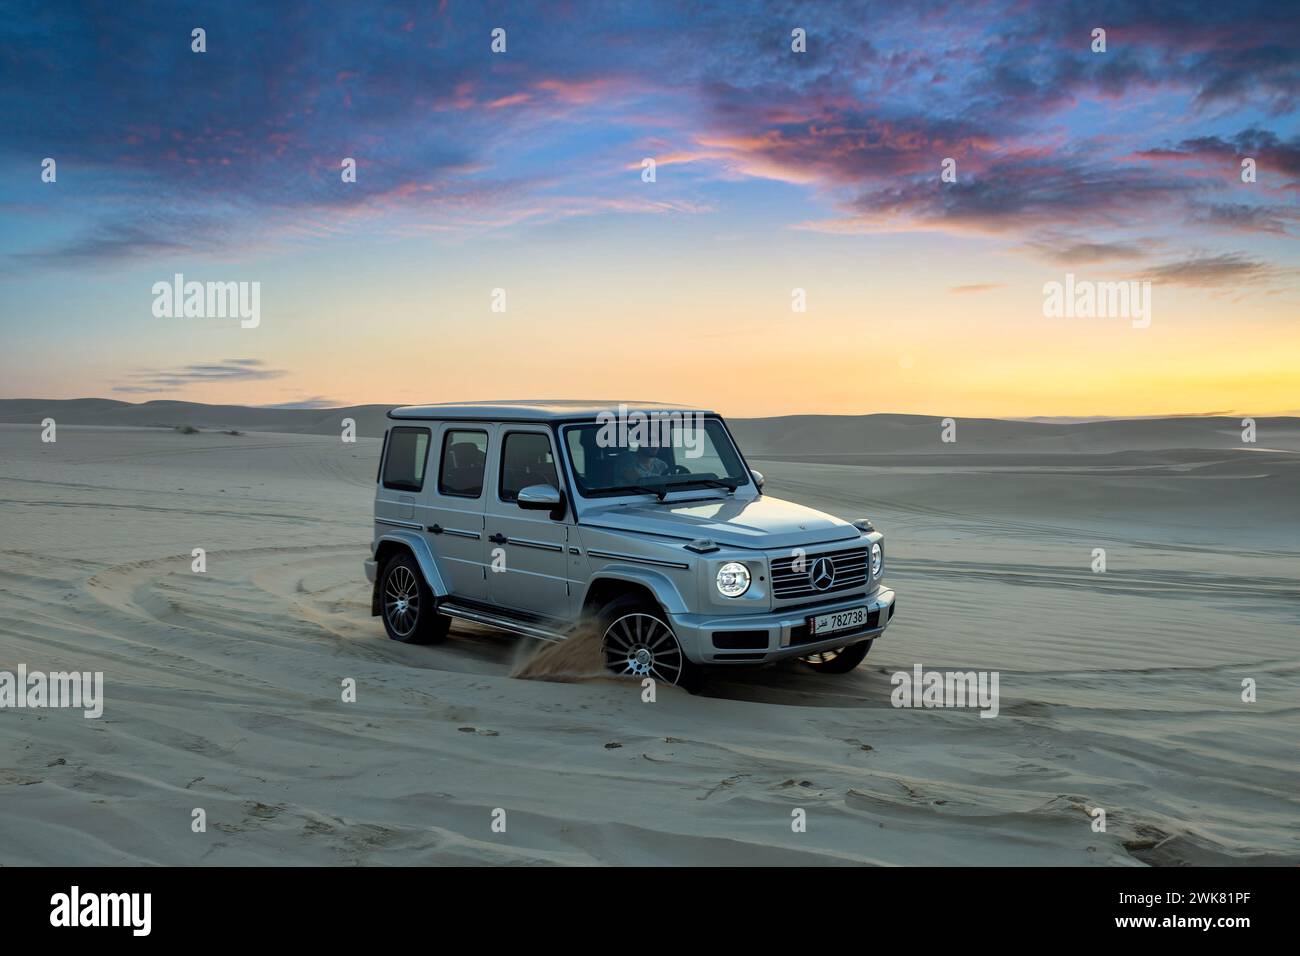 Mercedes G500 Silver Color Dune Bashing Stock Photo